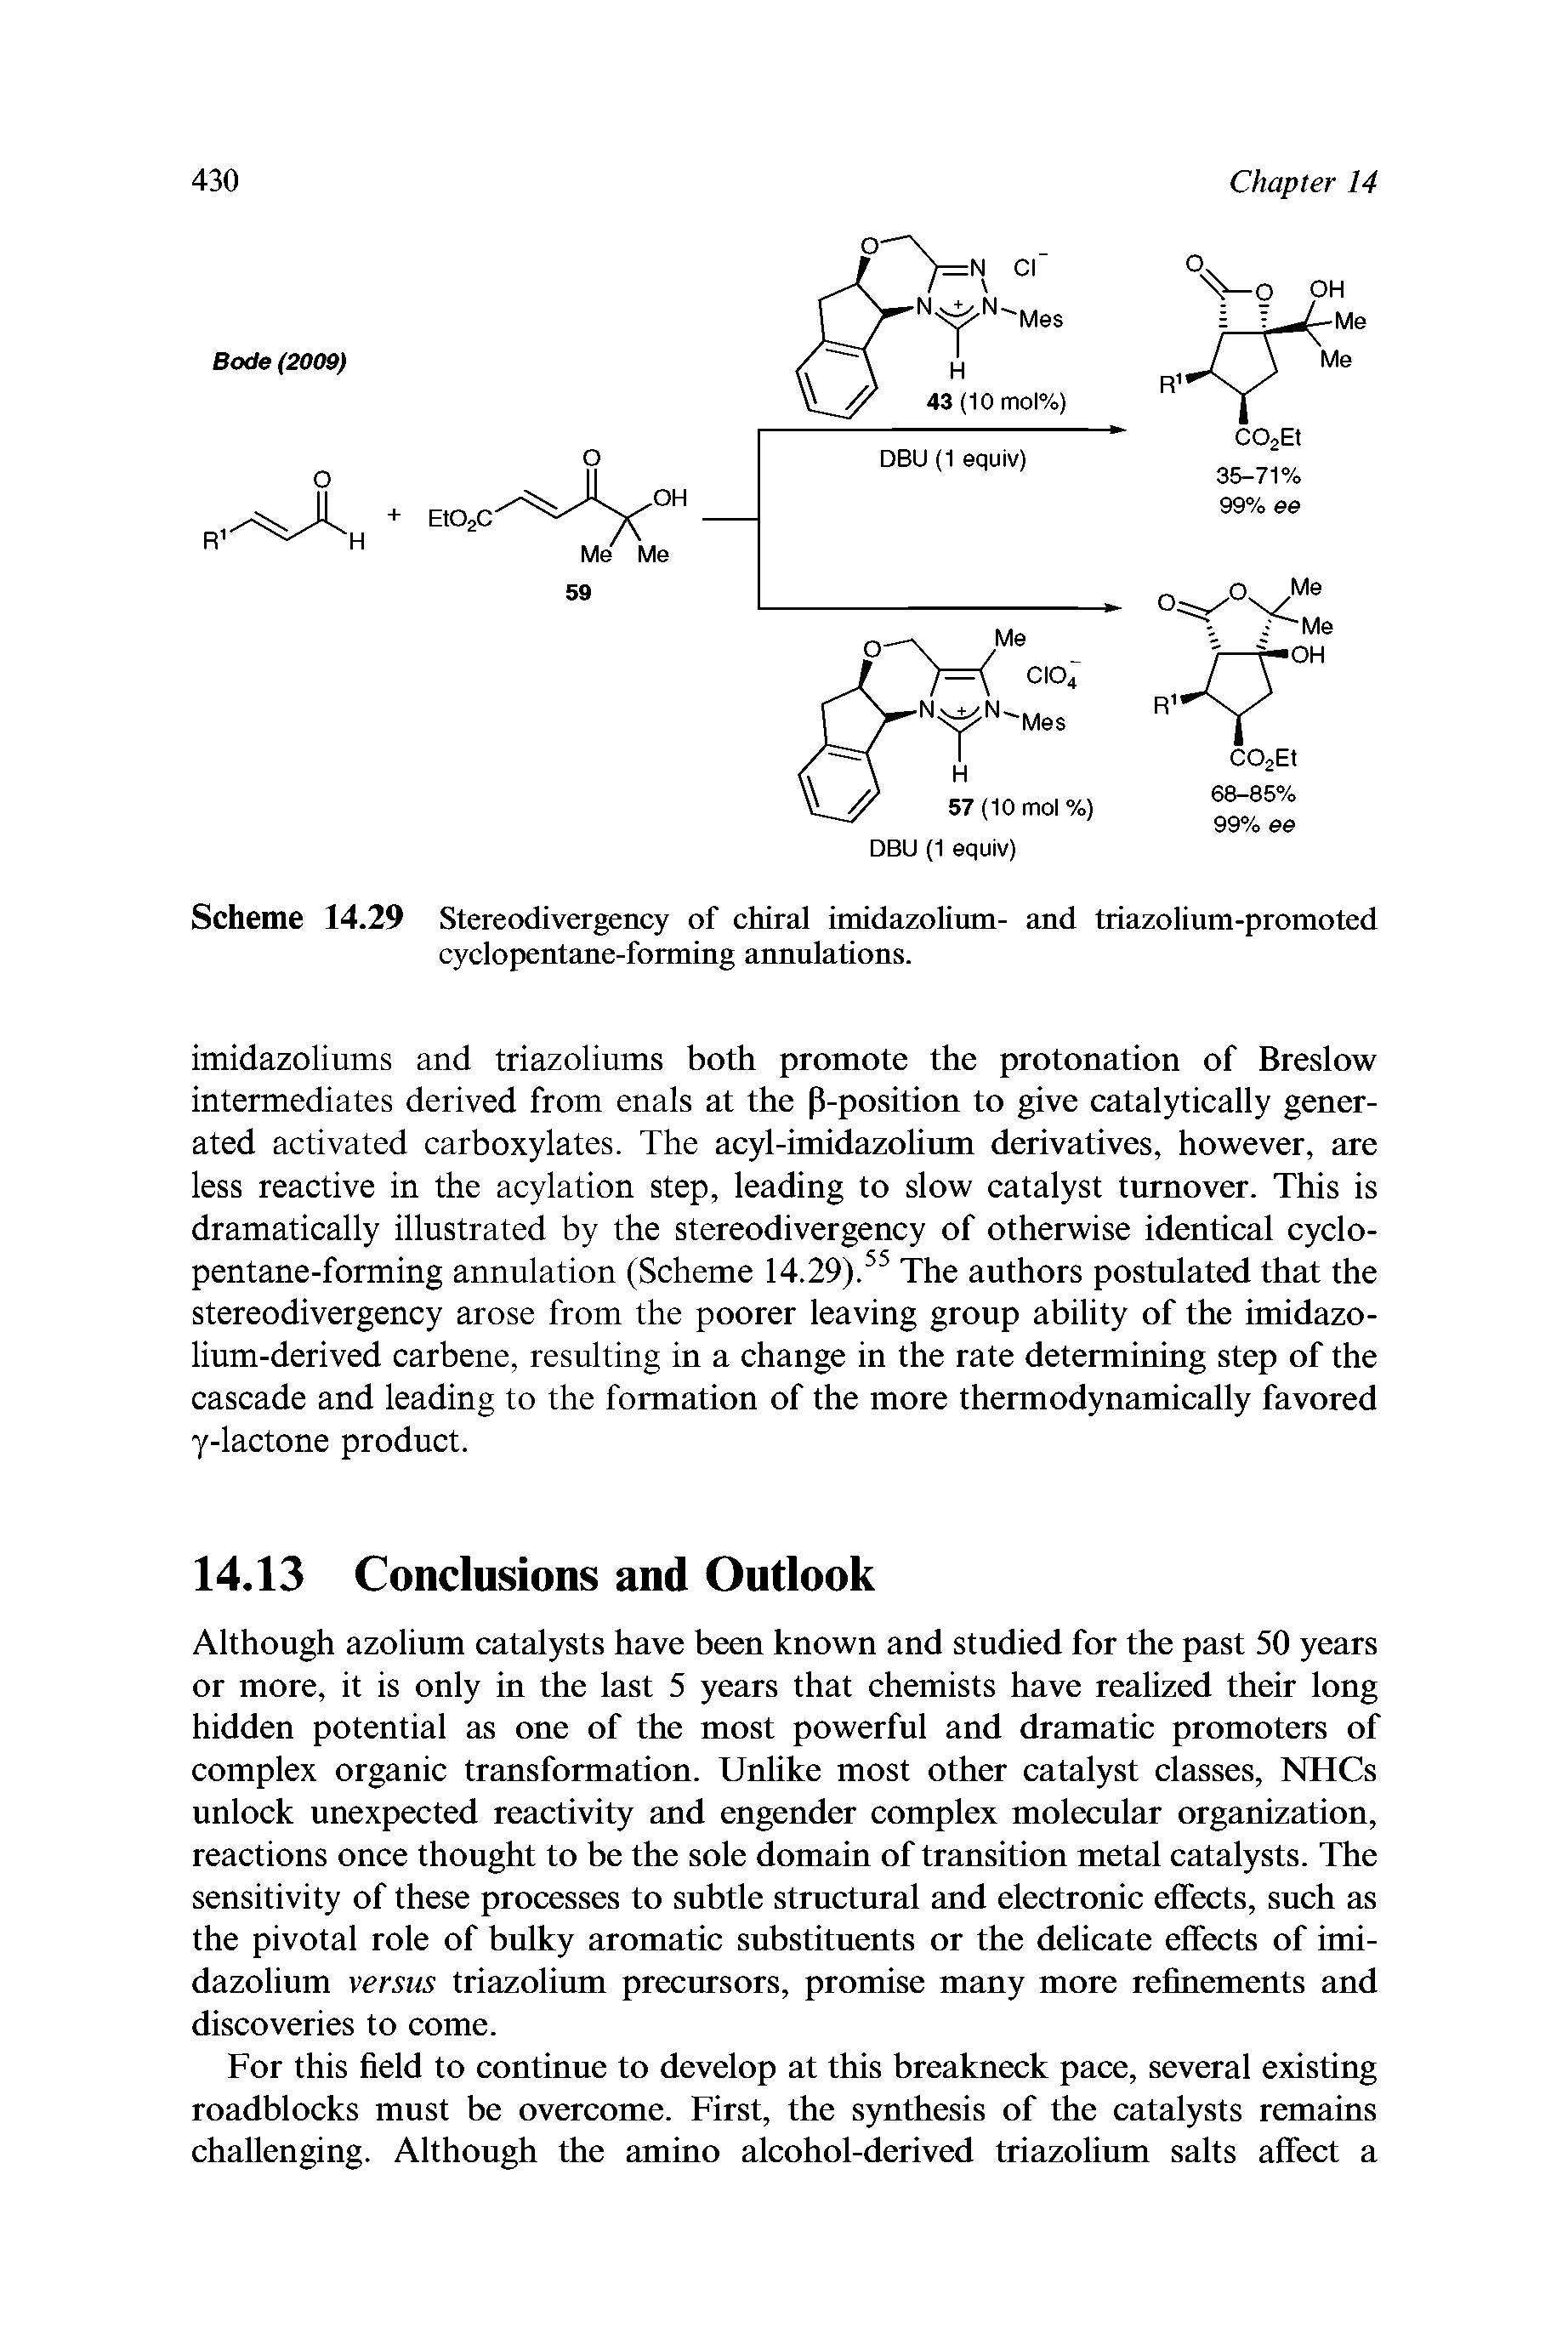 Scheme 14.29 Stereodivergency of chiral imidazolium- and triazolium-promoted cyclopentane-forming annulations.